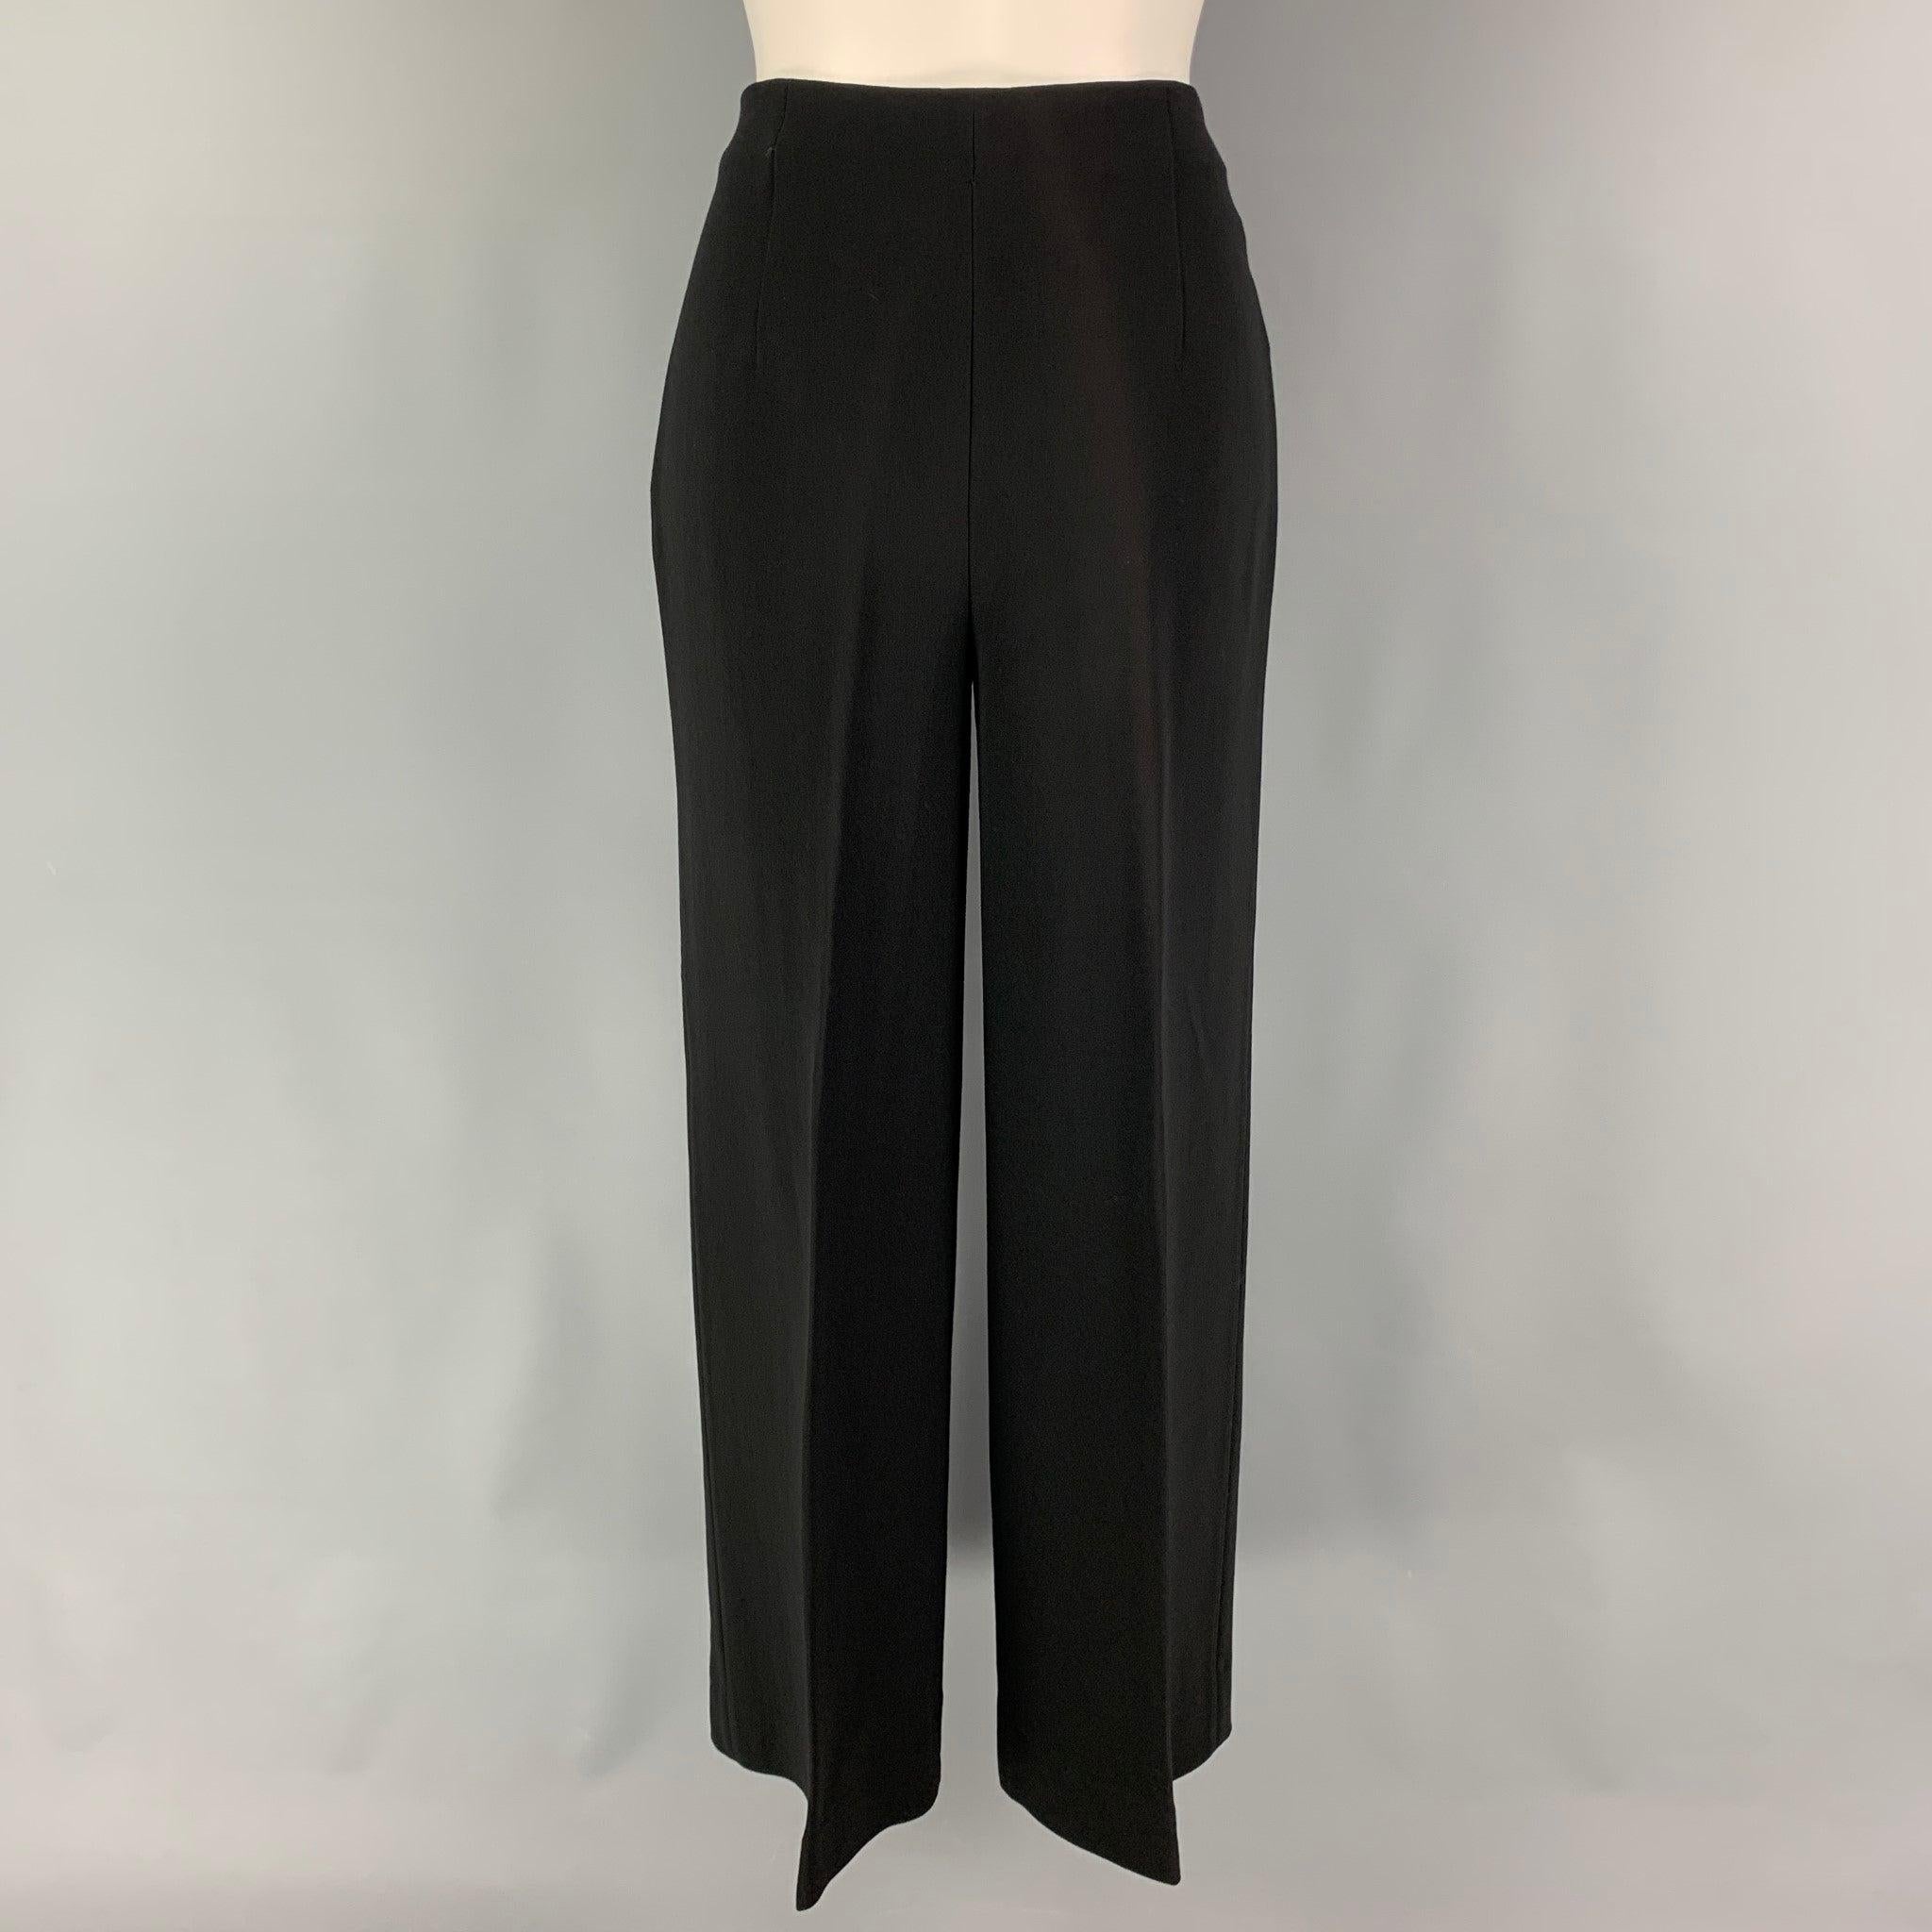 VALENTINO dress pants comes in a black viscose blend featuring a wide leg style and a side zipper closure. Made in Italy.
Excellent
Pre-Owned Condition. 

Marked:   8 

Measurements: 
  Waist: 28 inches Rise: 12 inches Inseam: 29 inches Leg Opening: